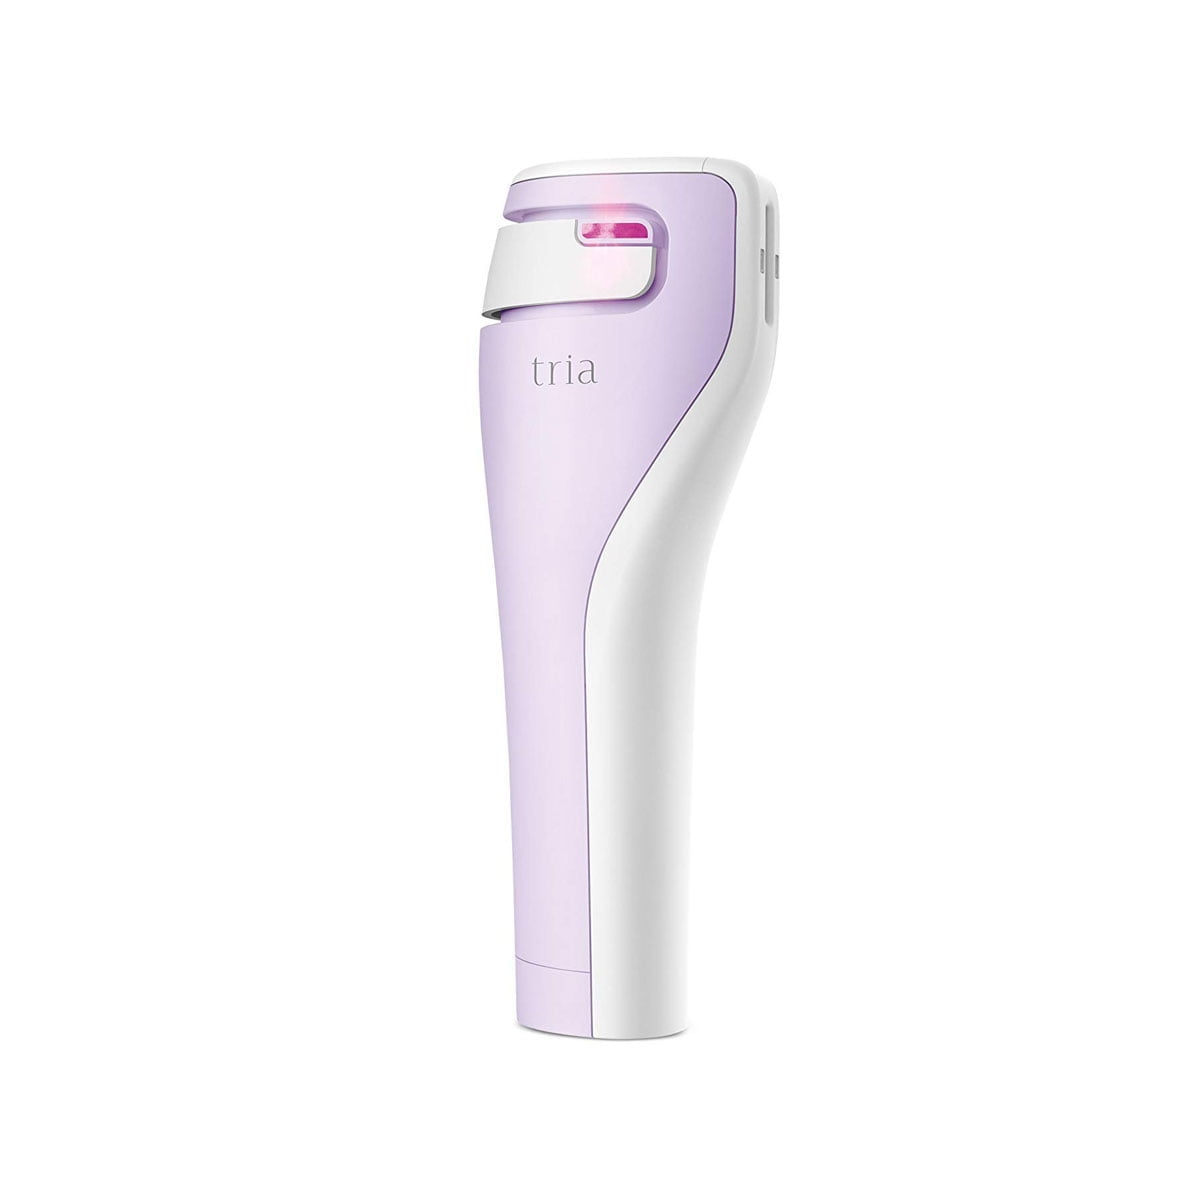 Tria Beauty Age Defying Laser Wrinkles Fine Lines 2 Tria &Lt;Div Class=&Quot;Page-Title-Wrapper Product&Quot;&Gt; &Lt;H1&Gt;Tria - Age Defying Laser&Lt;/H1&Gt; Https://Www.youtube.com/Watch?V=Qcuojbj97Zq &Lt;/Div&Gt; &Lt;Div Class=&Quot;Product-Info-Price&Quot;&Gt; Tria'S Fractional, Non-Ablative Skin Rejuvenating Laser Will Treat Multiple Signs Of Aging, Making You Appear More Youthful And Radiant. It Reduces Fine Lines And Wrinkles Around Eyes And Mouth And Improves Skin’s Texture And Reduces Appearance Of Dark Pigmentation Such As Brown Spots. Please Allow Additional 2-3 Days Over The Estimated Delivery Time Given At Check Out &Lt;/Div&Gt; &Lt;Pre&Gt;&Lt;B&Gt;We Also Provide International Wholesale And Retail Shipping To All Gcc Countries: Saudi Arabia, Qatar, Oman, Kuwait, Bahrain.&Lt;/B&Gt;&Lt;/Pre&Gt; Age Defying Laser Tria - Age Defying Laser